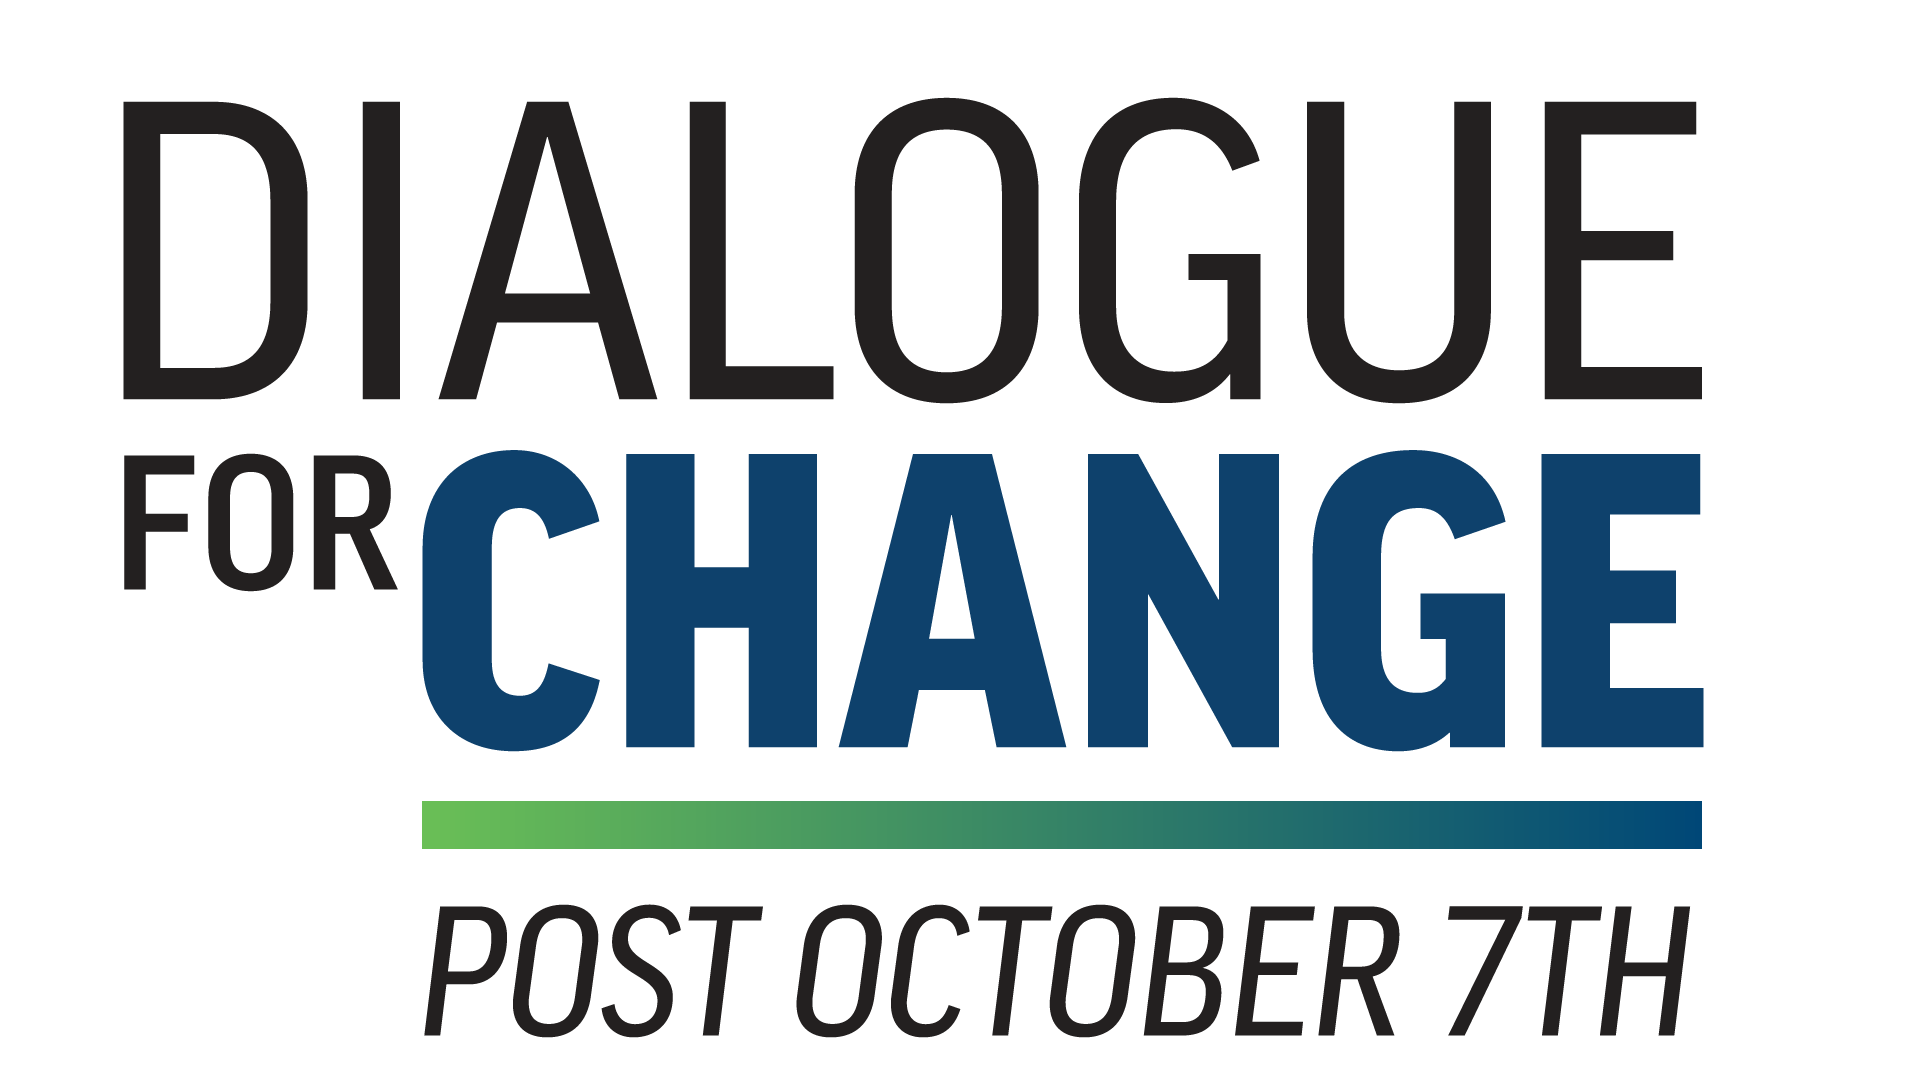 Dialogue for Change: Post October 7th